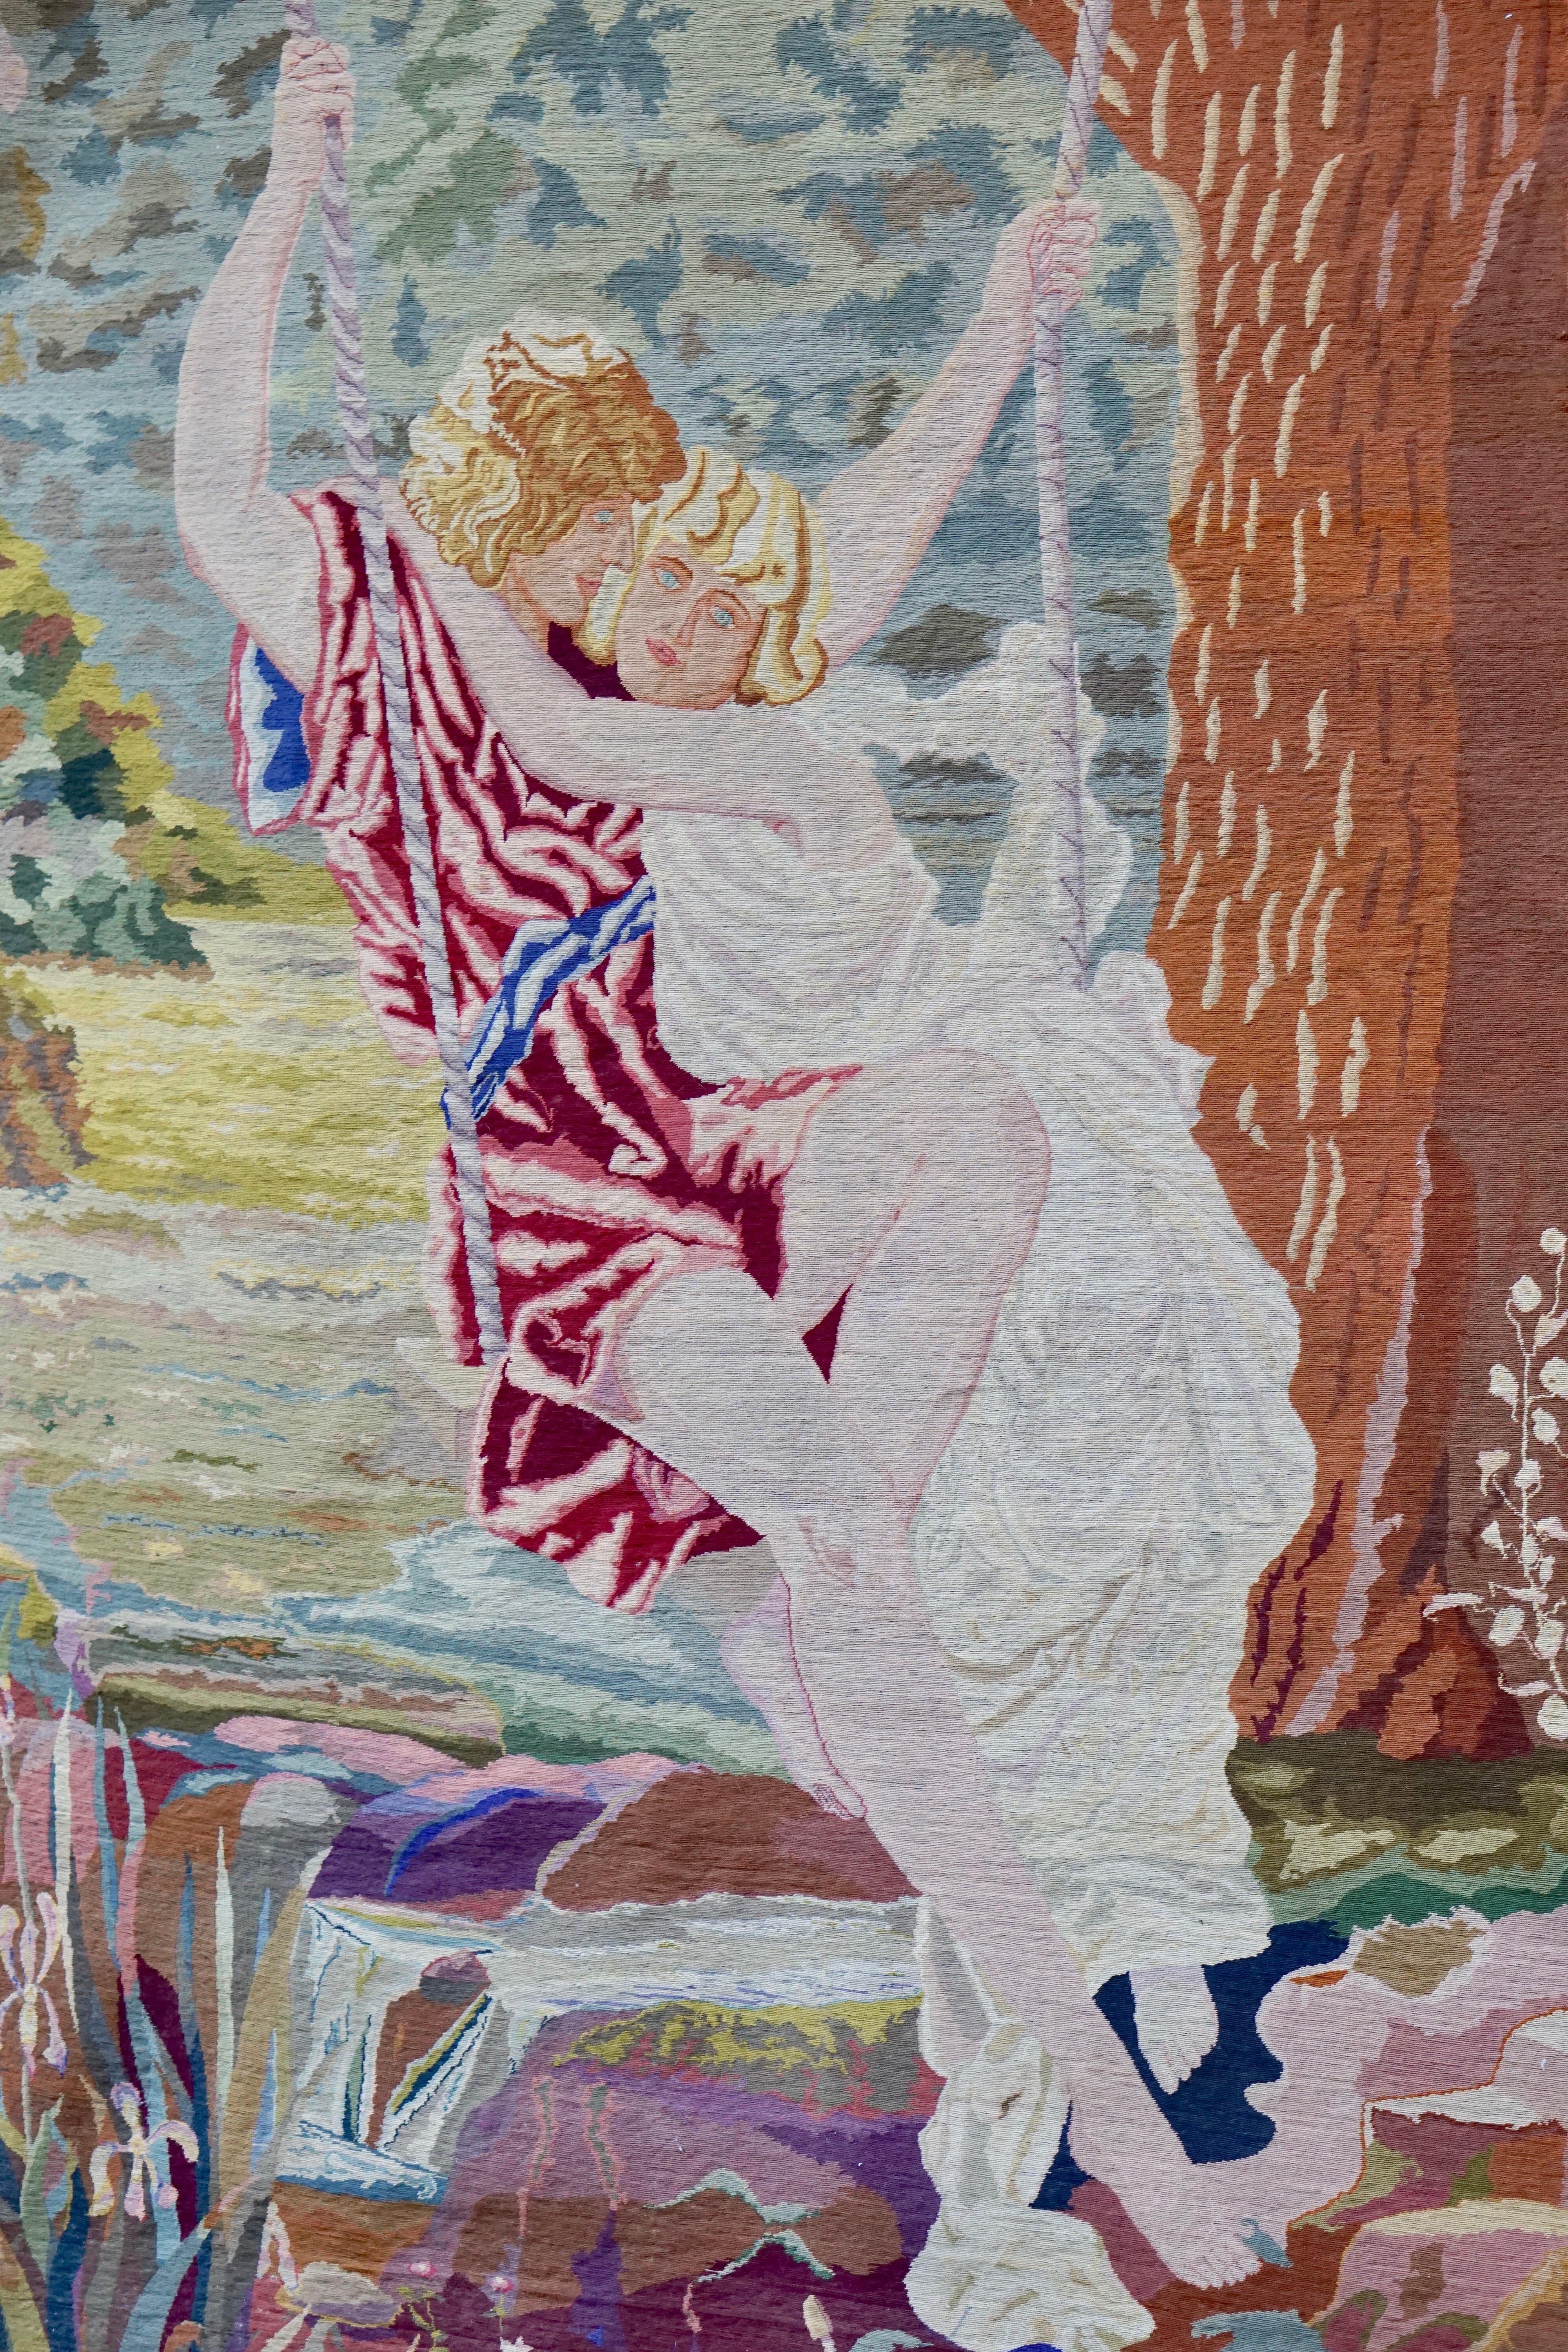 Romantic Art Nouveau Tapestry or Wall Hanging Representing Two Lovers in a Swing (20. Jahrhundert)